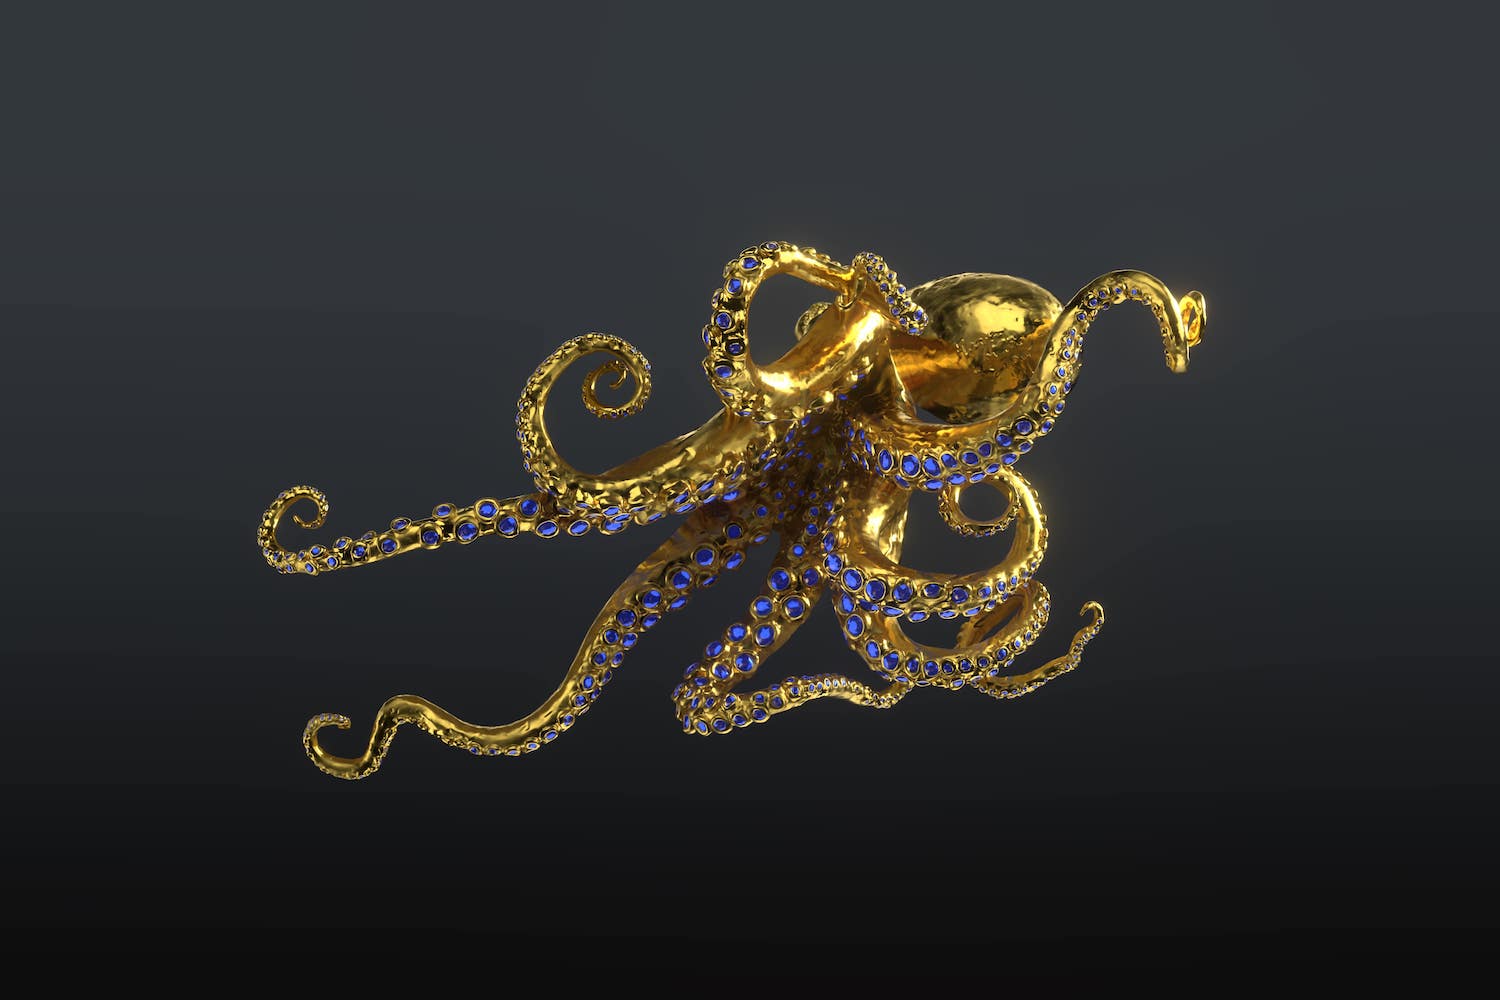 Gold Octopus by Hamish Mackie with blue sapphires